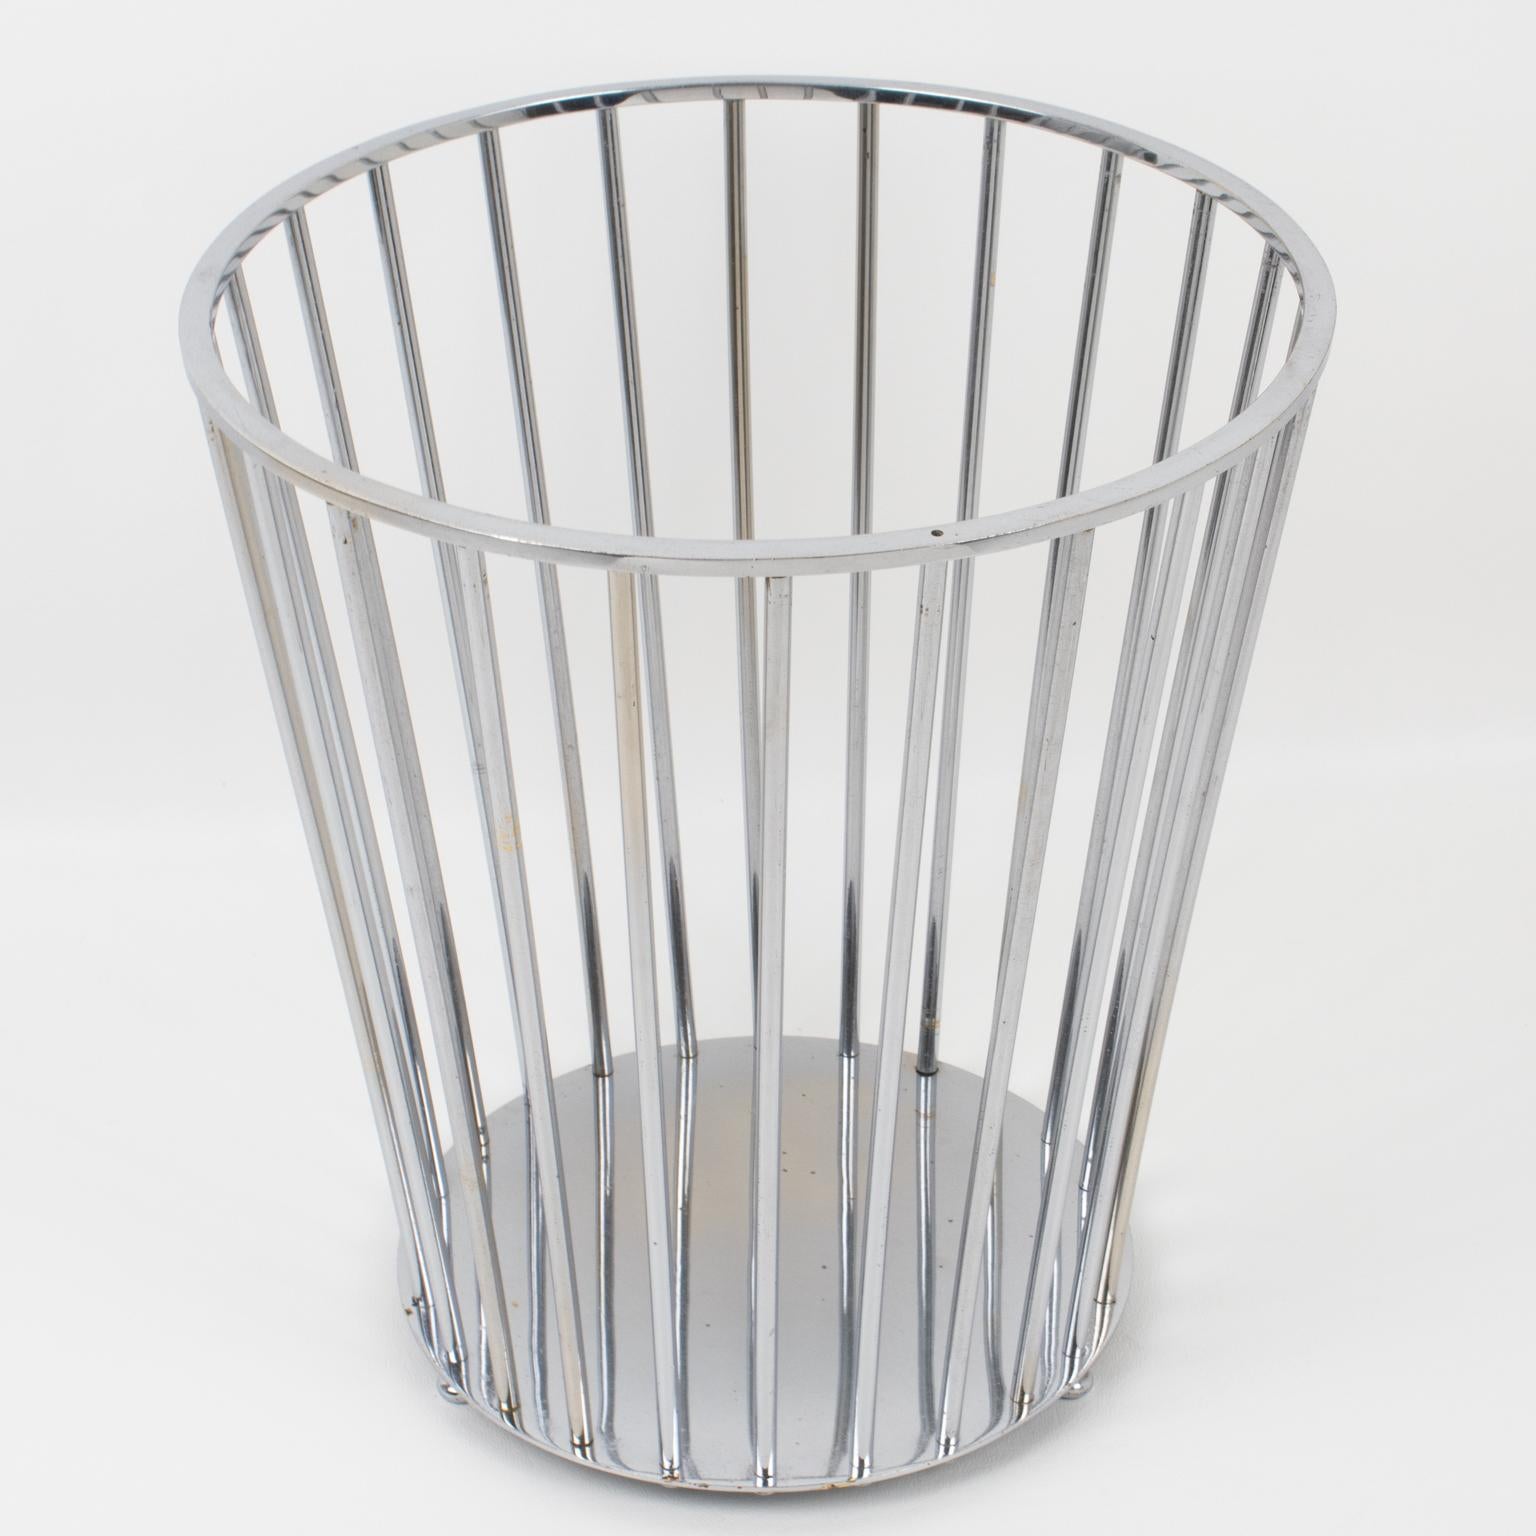 French designer Jacques Adnet (1900-1984) designed this elegant Art Deco modernist chromed metal desk accessory, or office waste basket. The minimalist geometric round shape features a typical Art Deco design with slim columns resting on a rounded